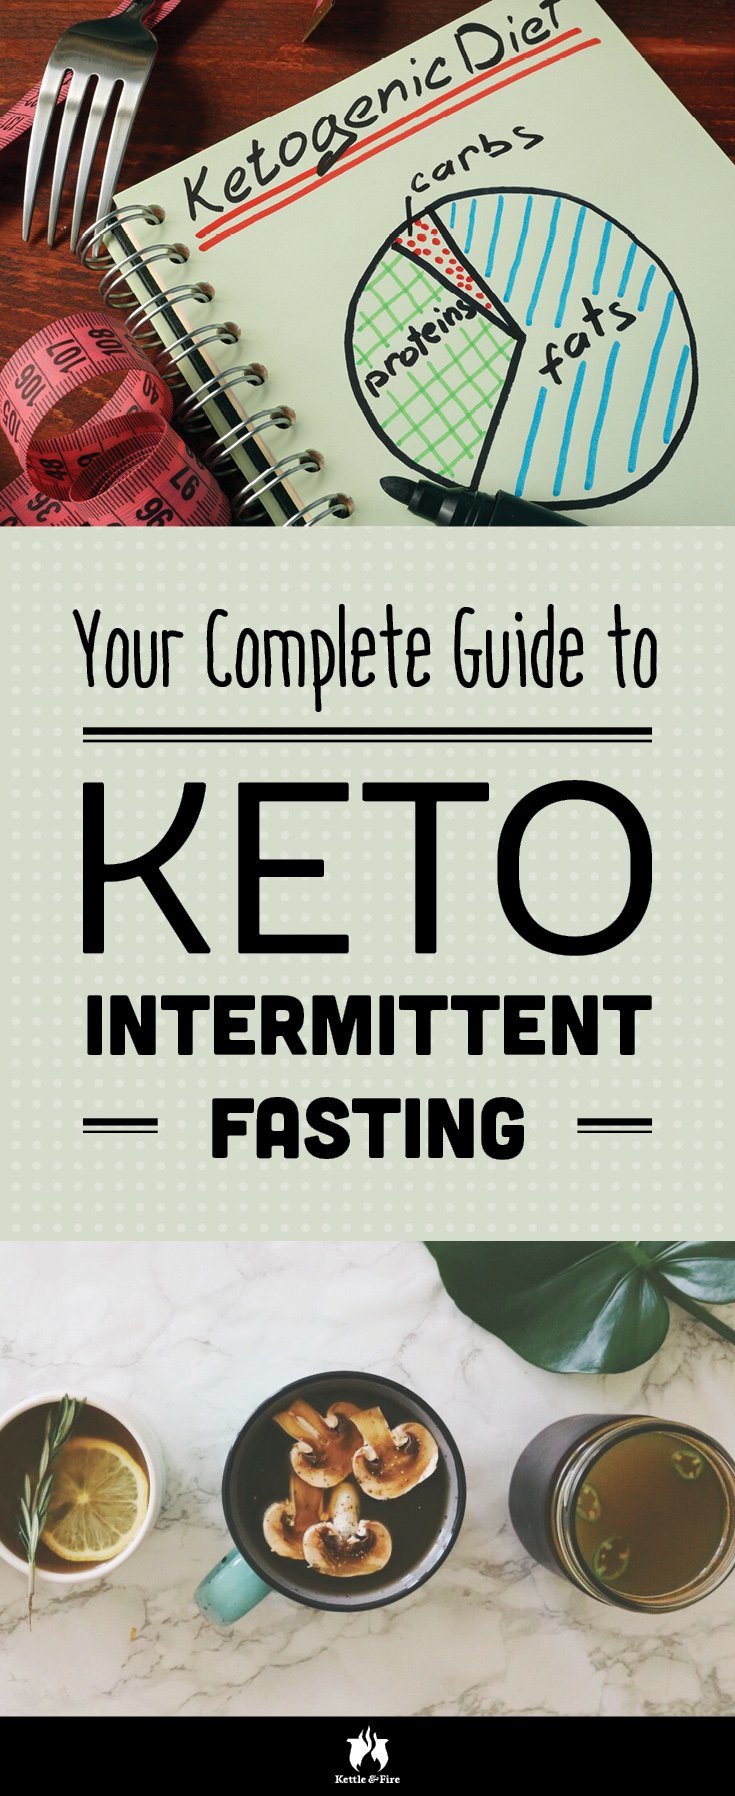 Your Complete Guide to Keto Intermittent Fasting